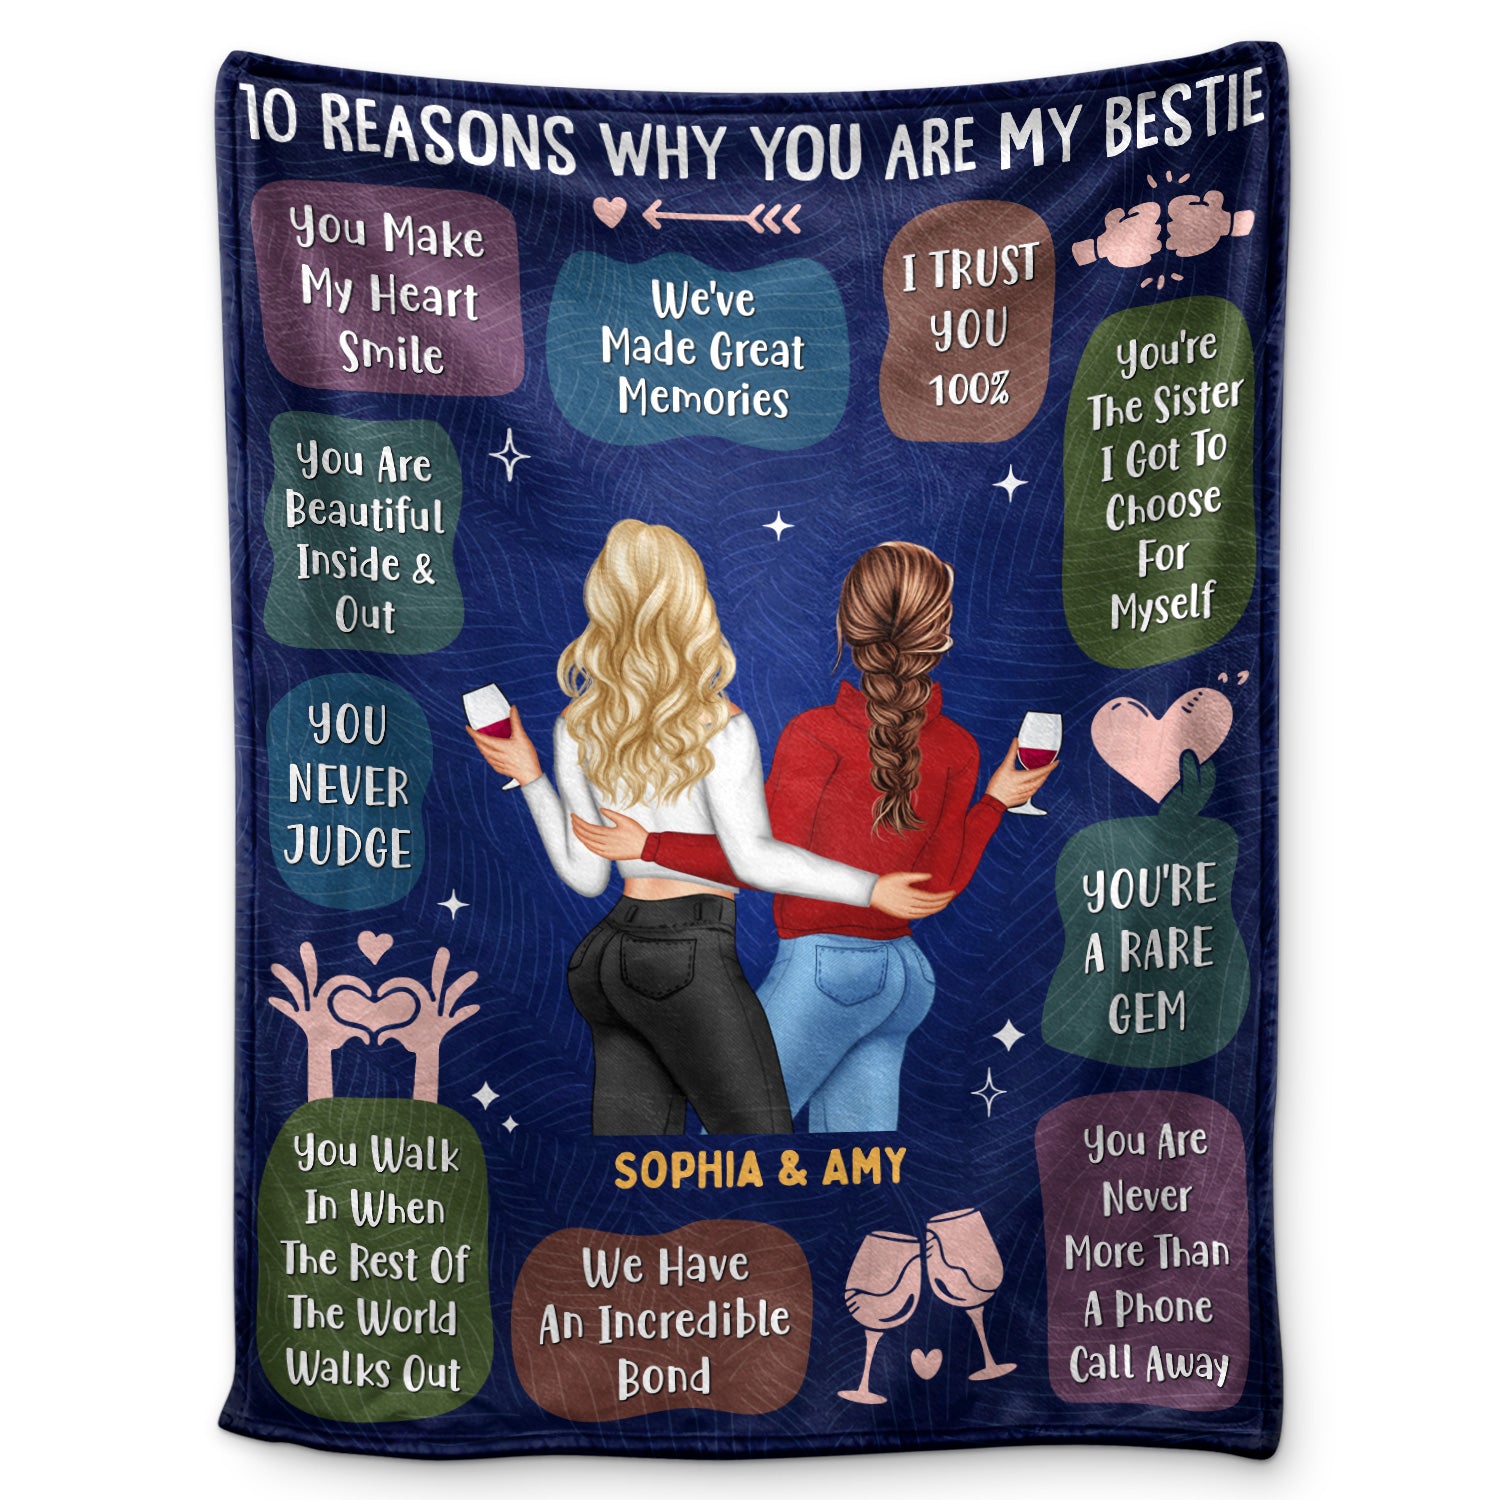 10 Reasons Why You Are My Bestie - Holiday, Birthday, Loving Gift For Friends, Colleagues - Personalized Fleece Blanket